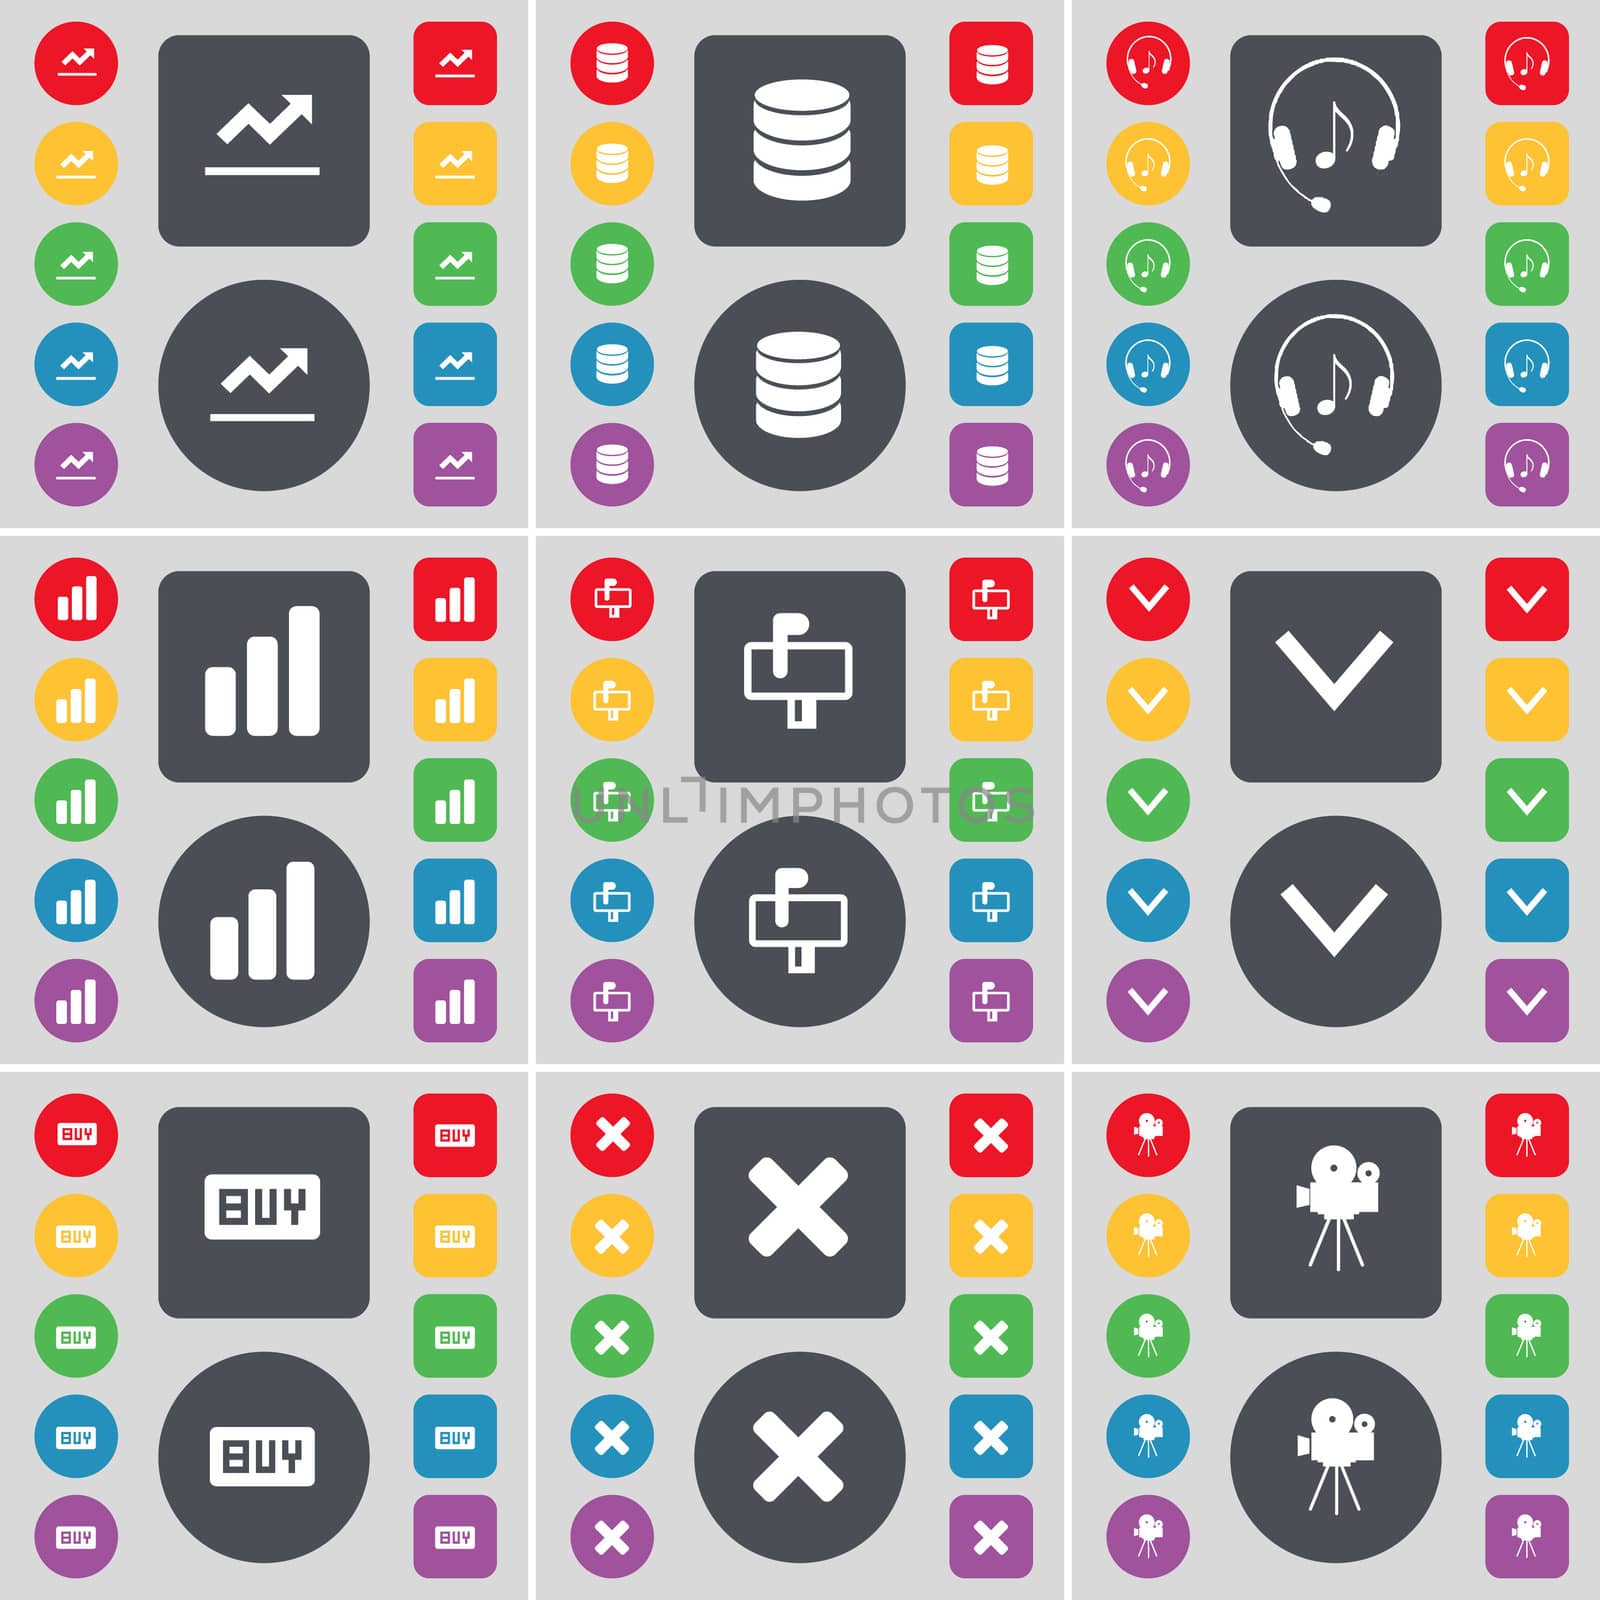 Graph, Database, Headphones, Diagram, Mailbox, Arrow down, Buy, Stop, Film camera icon symbol. A large set of flat, colored buttons for your design. illustration